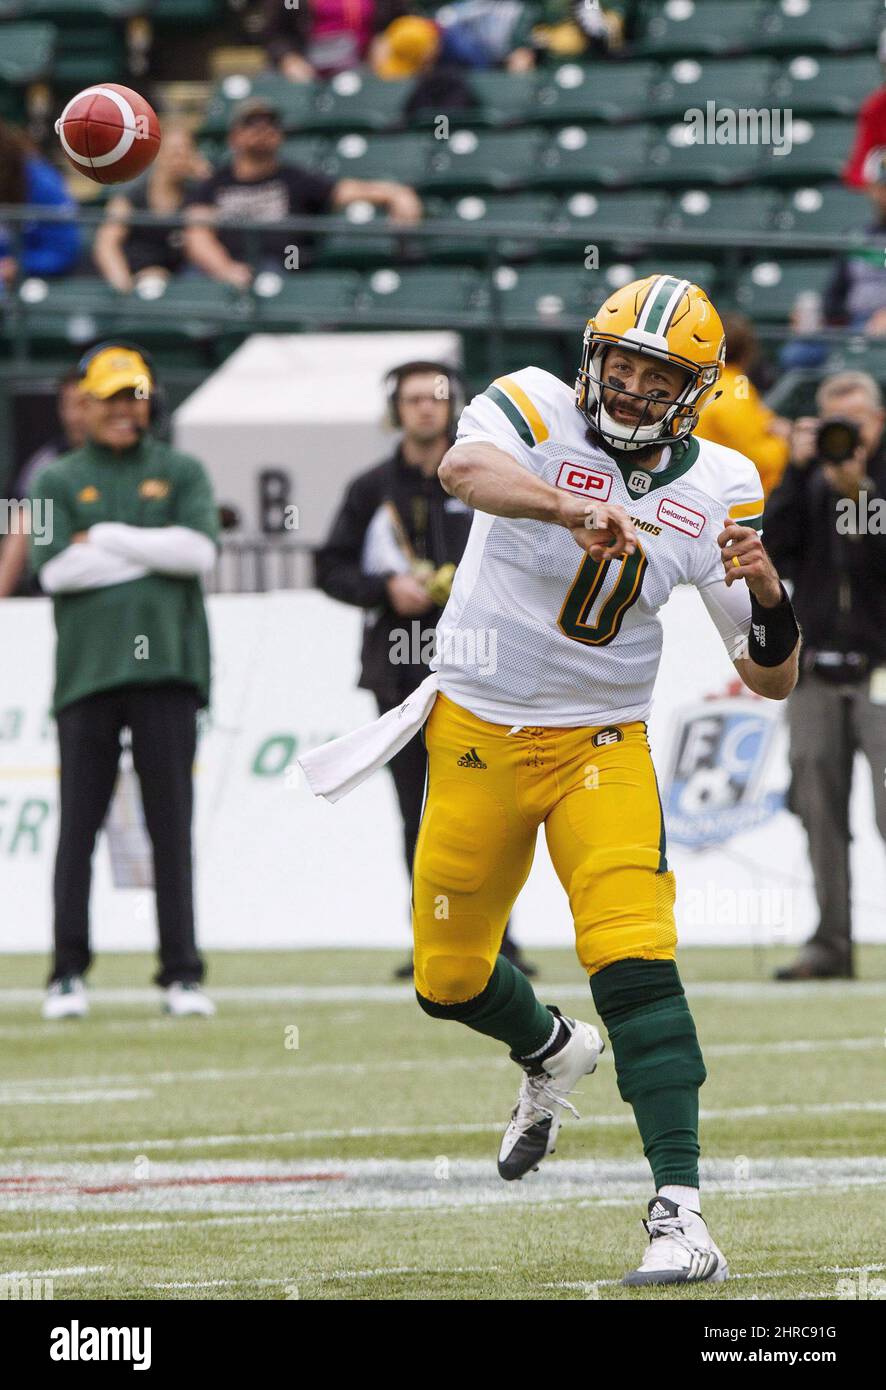 Edmonton Eskimos quarterback Mike Reilly during first half CFL pre-season action in Edmonton, Alta., on Sunday June 11, 2017. Reilly was born to run, but in his fifth season with the Edmonton Eskimos, the quarterback with the Methuselah beard has pretty much run out of things to experience. THE CANADIAN PRESS/Amber Bracken Stock Photo